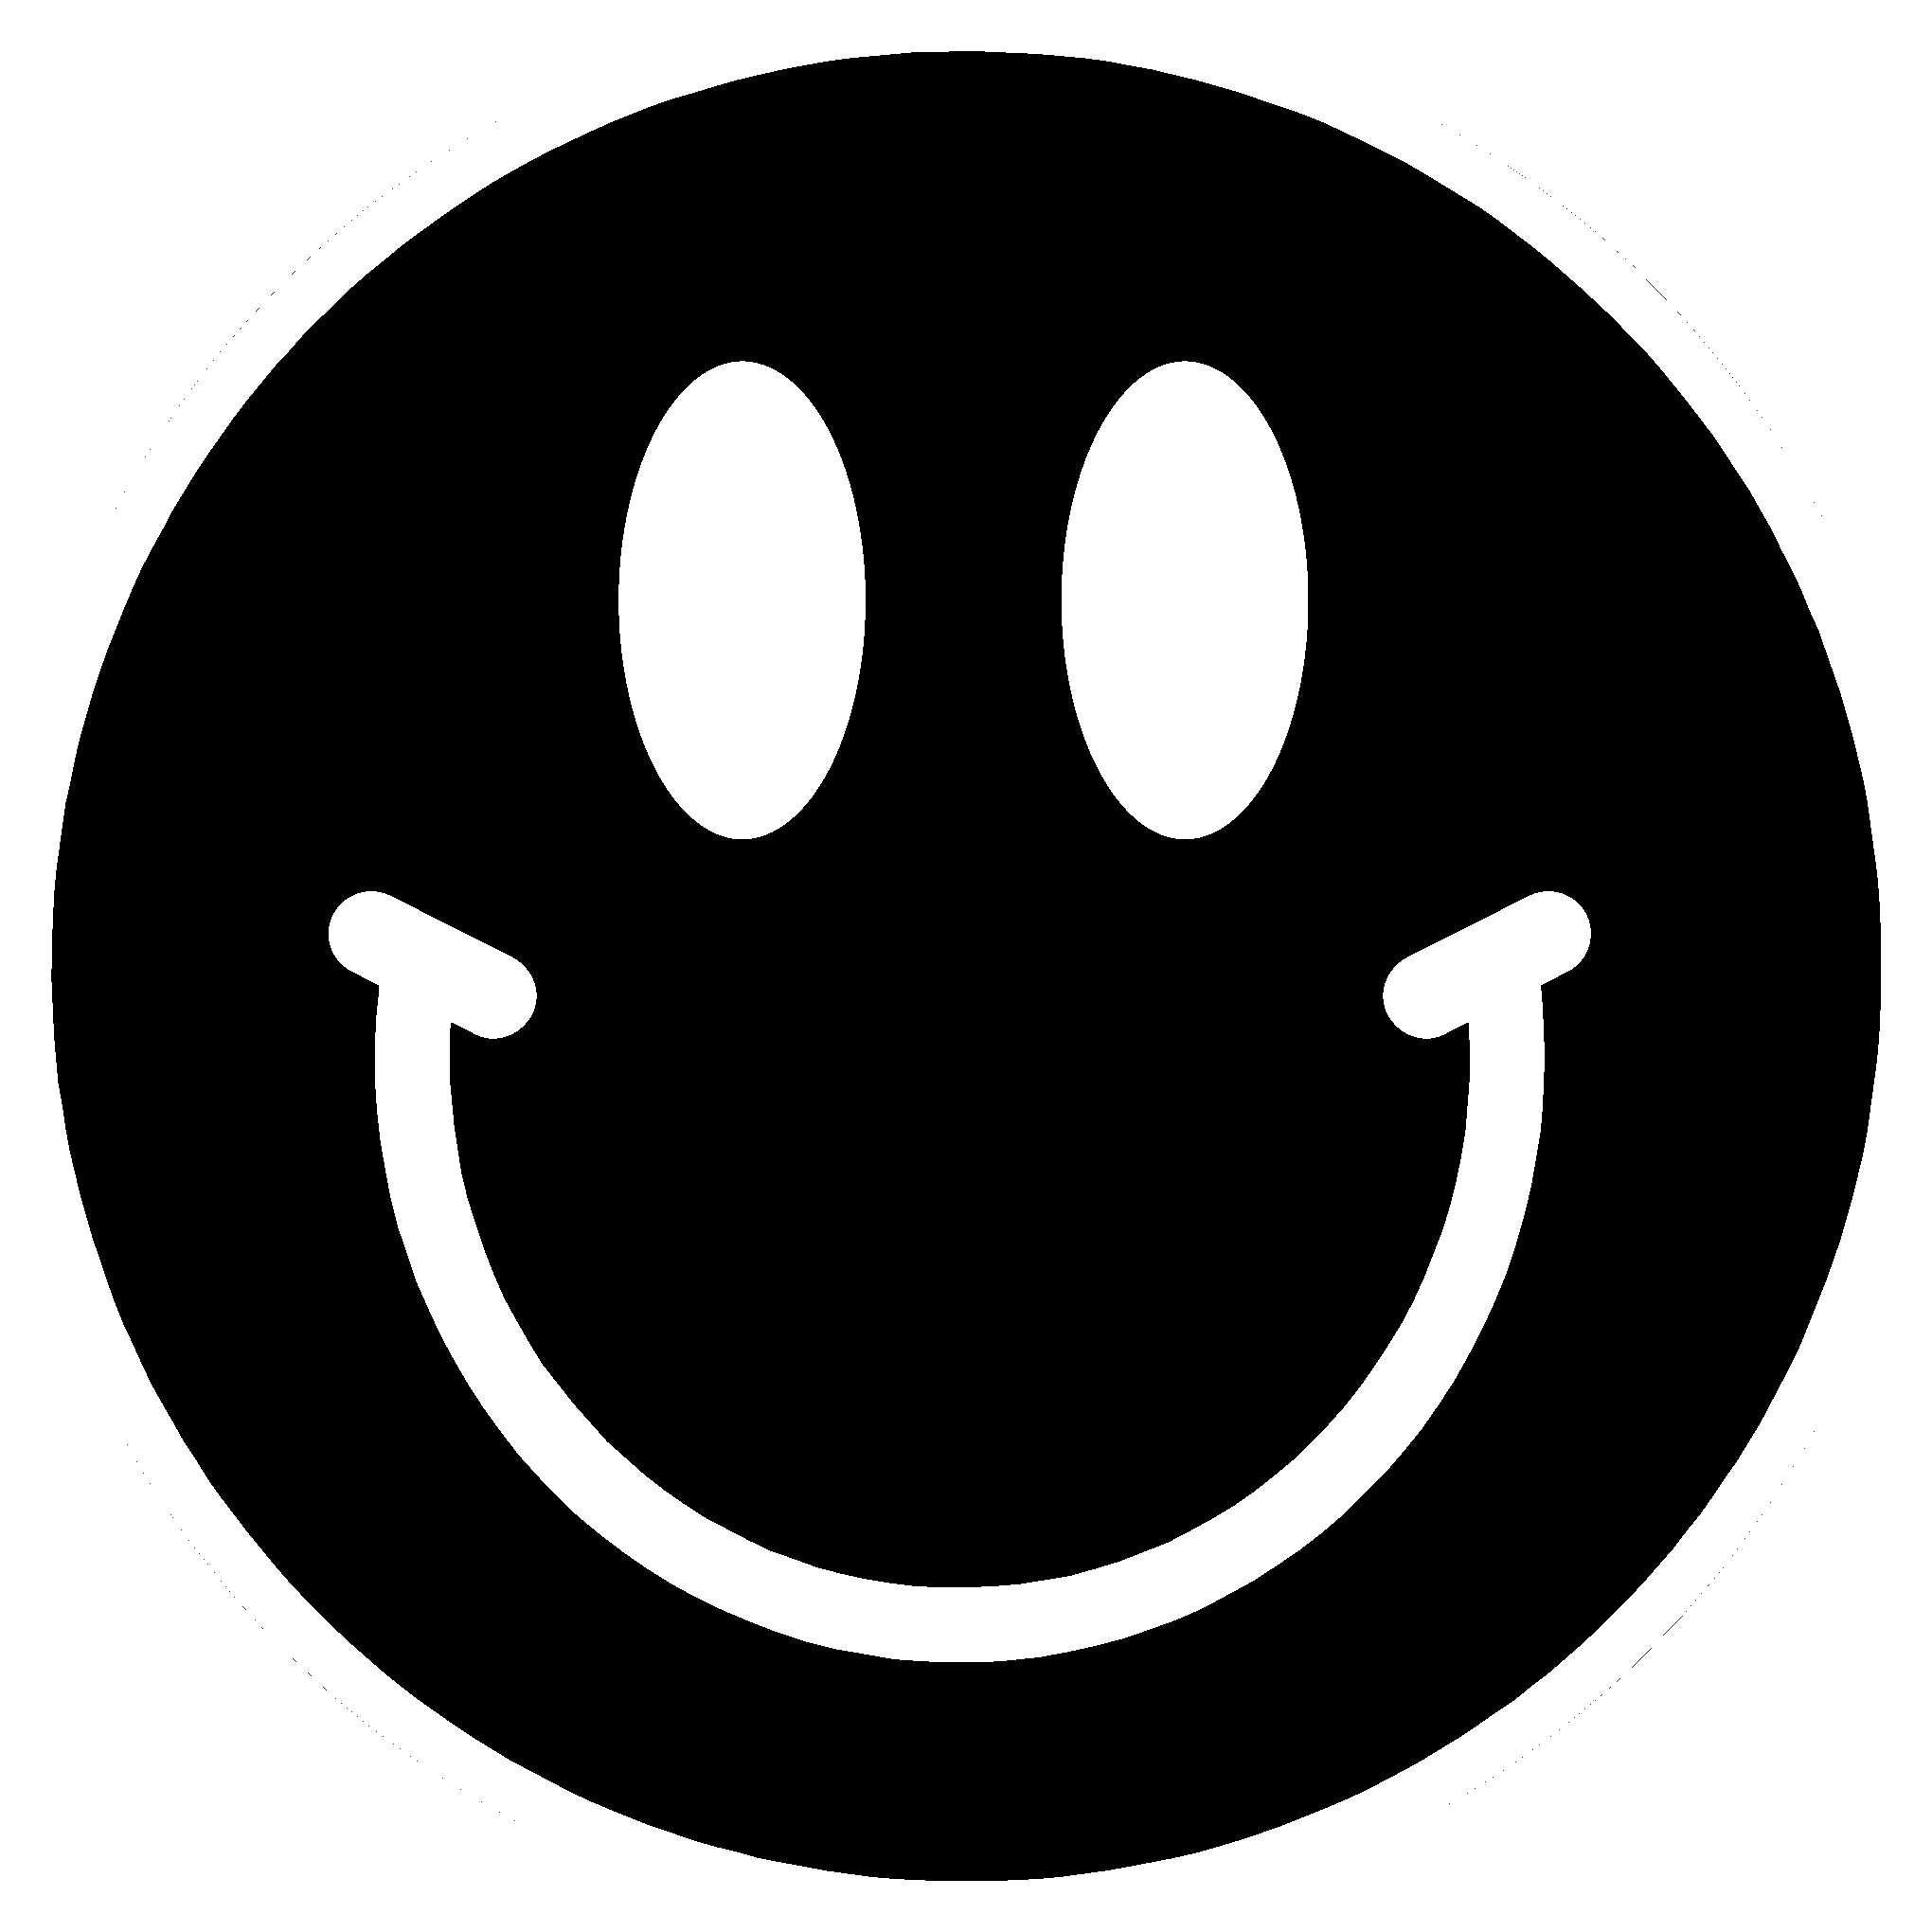 Smiley Face Black Background   ClipArt Best 2040x2040